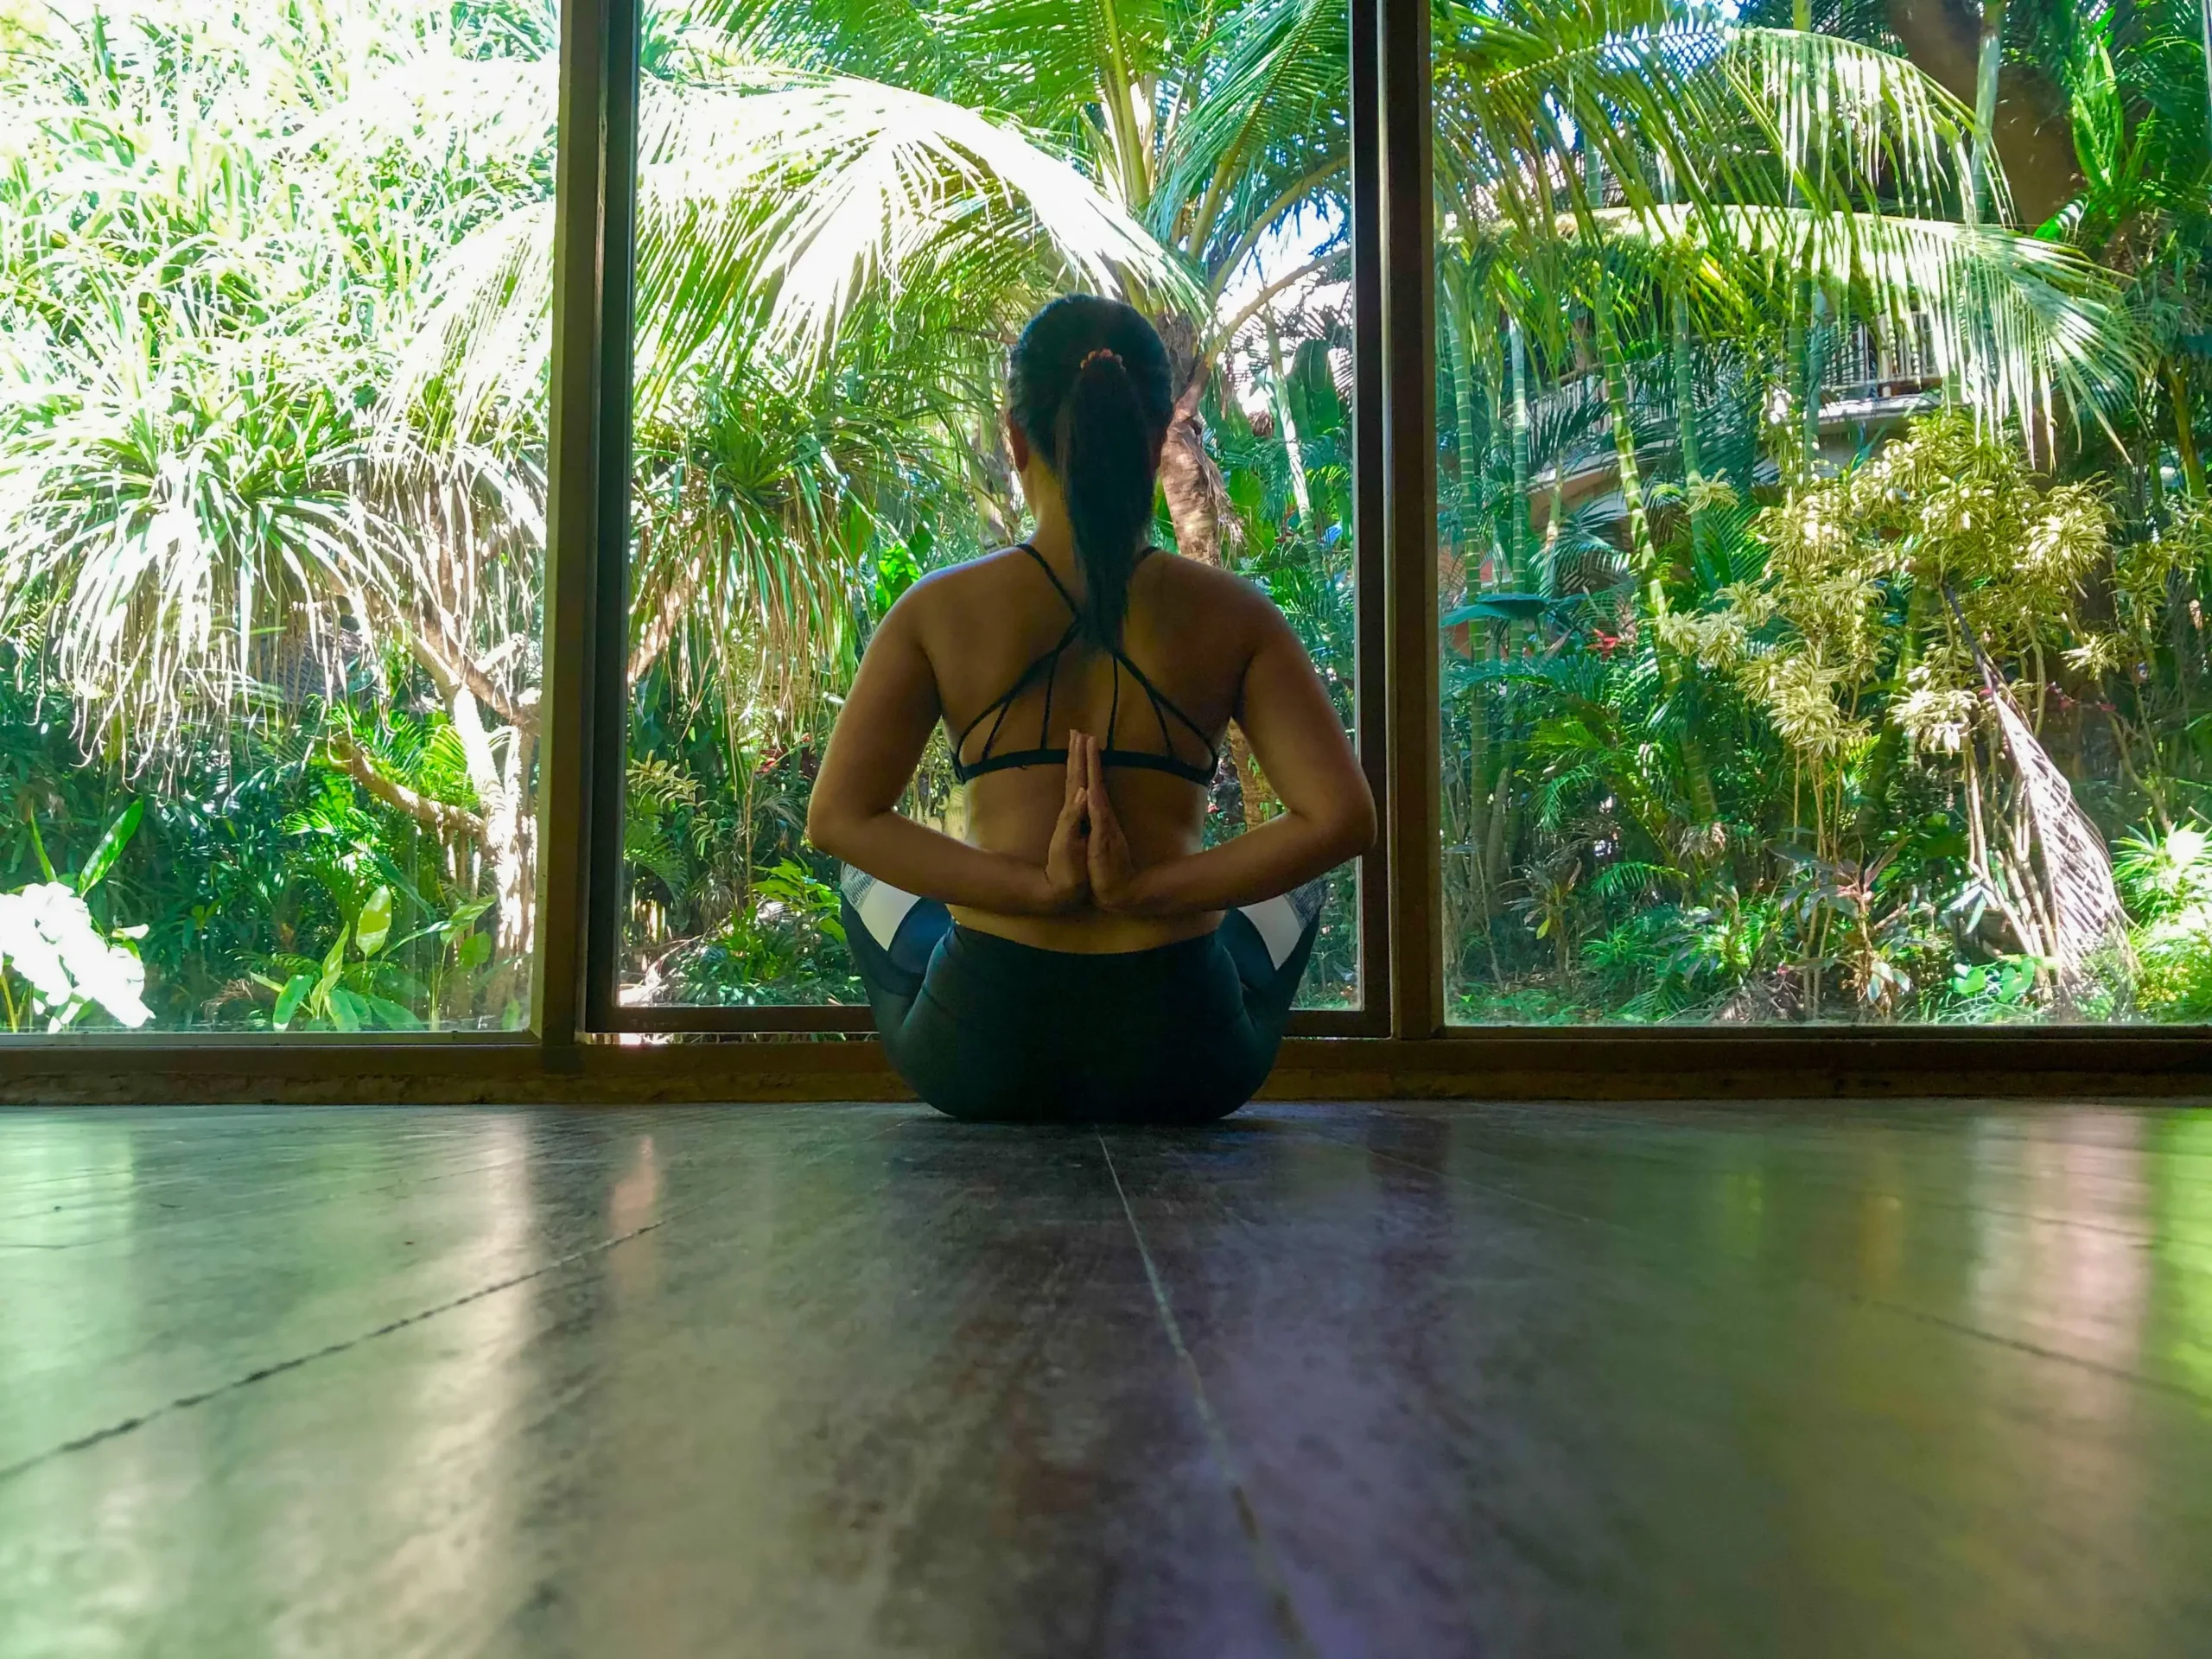  practice yoga in a seated twist pose, facing a large window overlooking a lush tropical garden at Yoga Barn Retreat in Bali. 